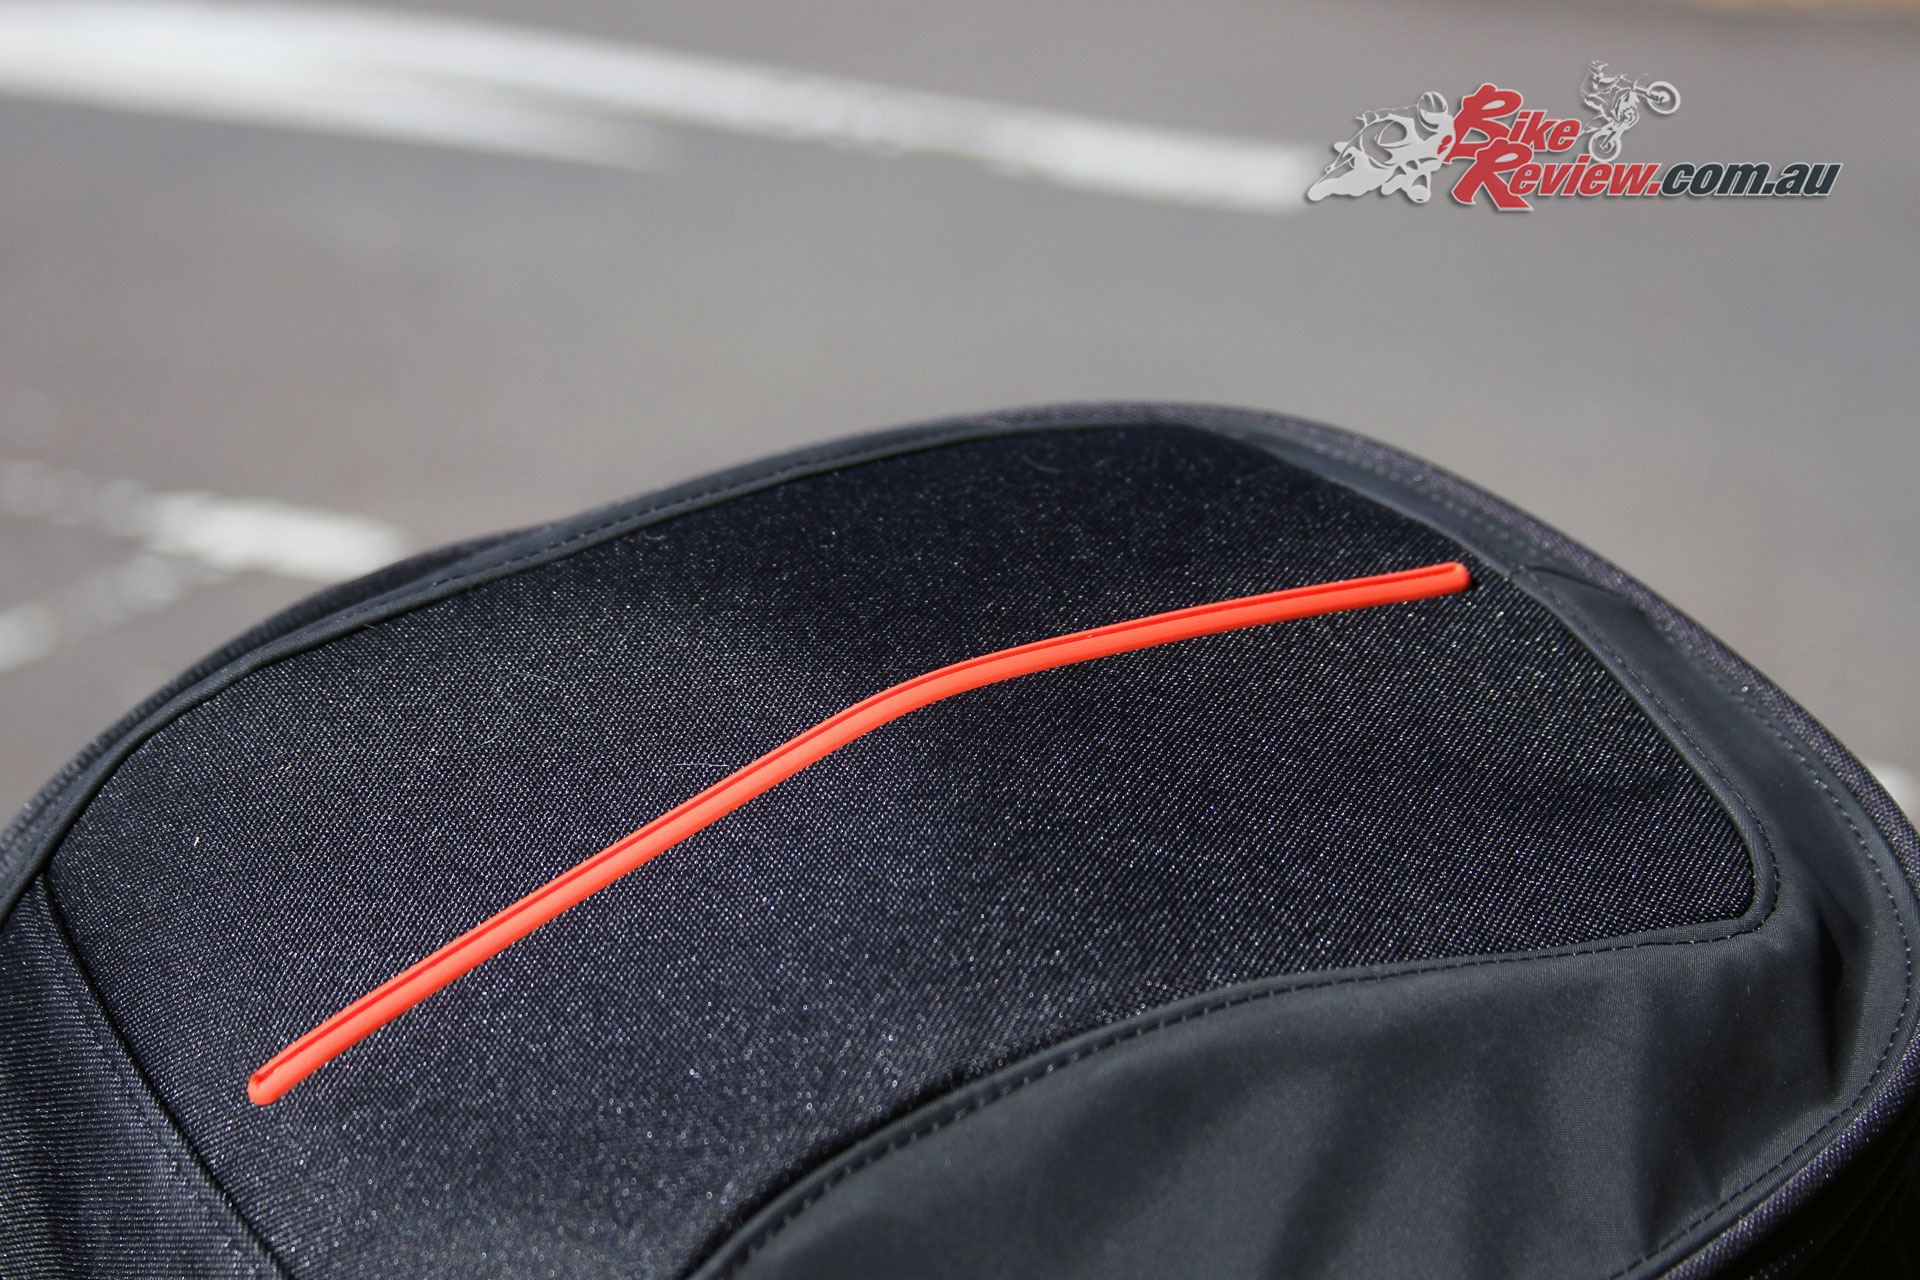 The red stripe across the top of the bike adds a touch of style, while reflective piping helps visibility